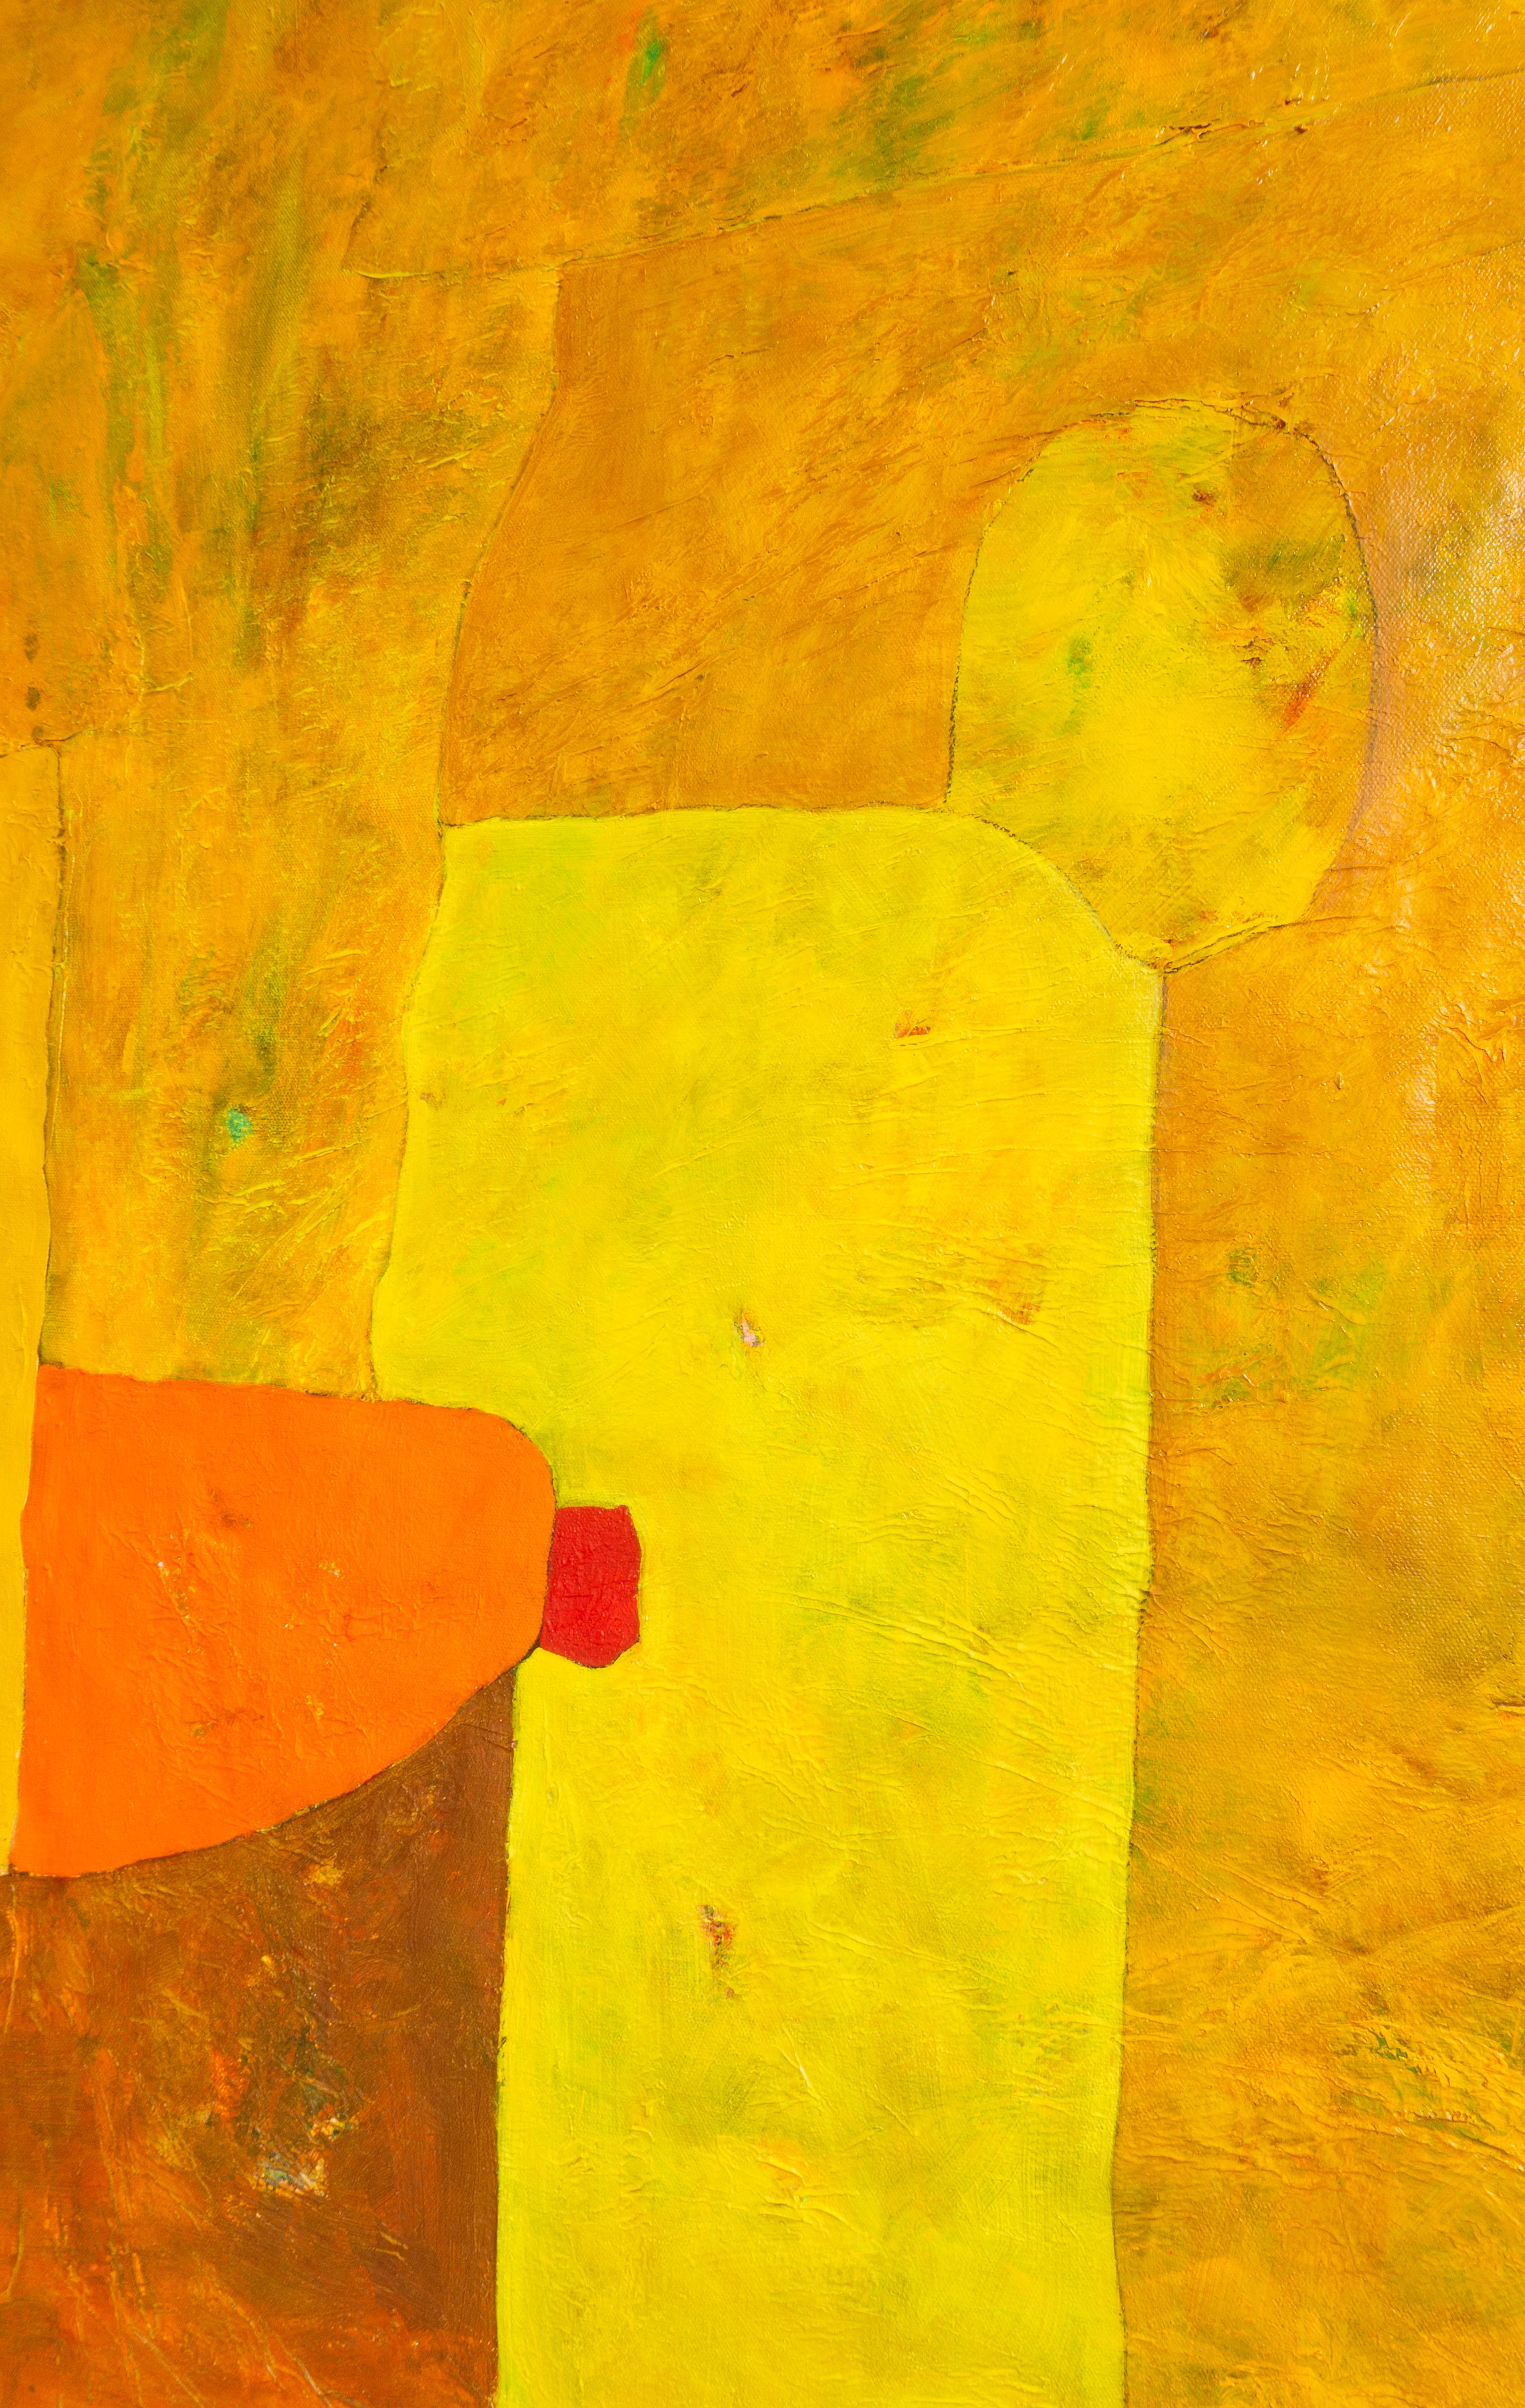 Yellow study - Abstract Painting by Luis Alexander Rodríguez (Ie-Xiua)